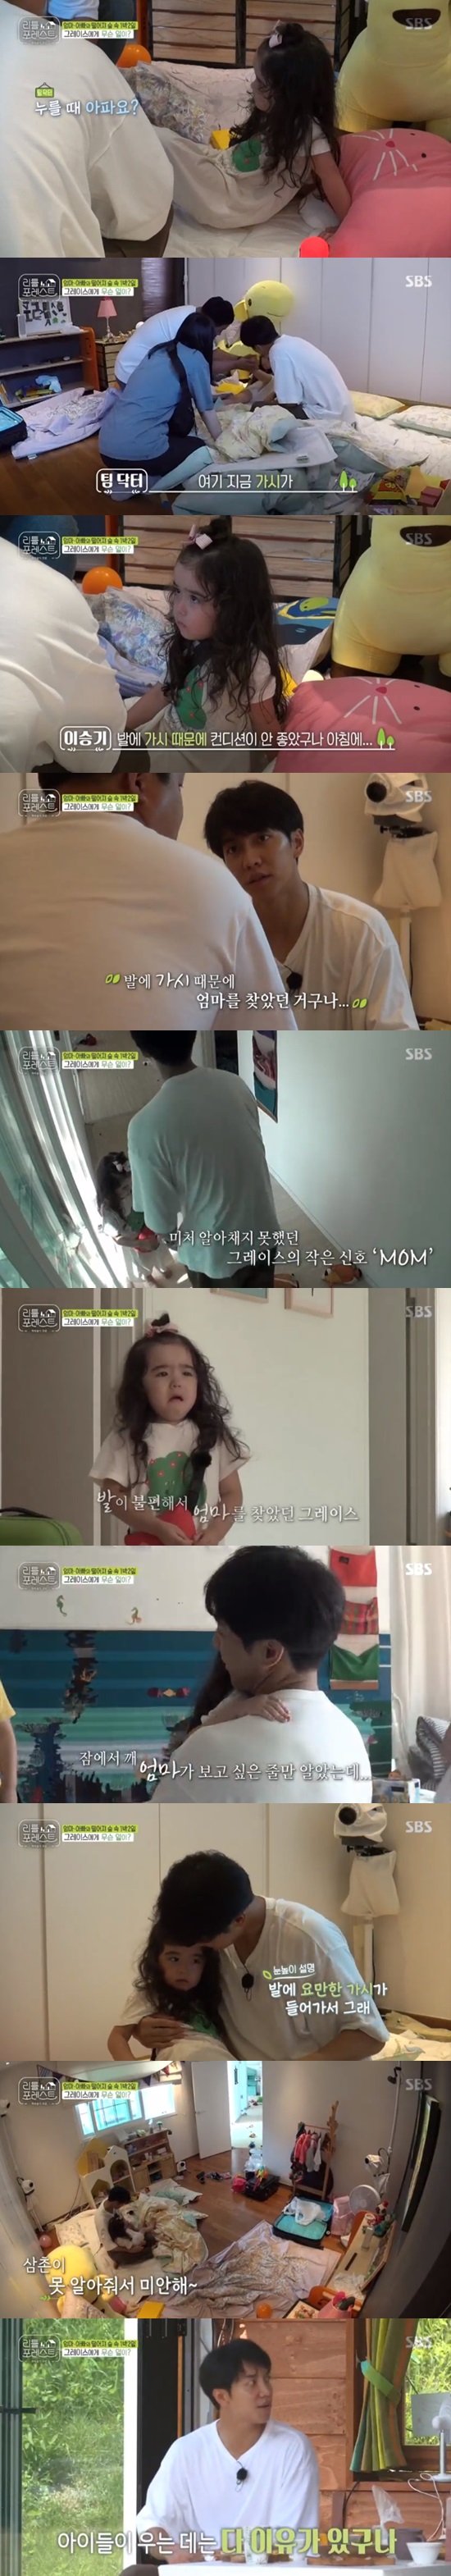 Lee Seung-gi has learned again from the tears of five-year-old Grace.On SBSs Little Forest, which aired on August 27, Lee Seung-gi misunderstood the signal that five-year-old Grace was crying for her mother.Grace, 5, was a cheerful child who comforted the Friends when they cried for their mother on their second visit, but on the same day, they were surprised by the way they cried for their mother by writing MOM in the sketchbook.Lee Seung-gi thought Grace was just looking for her mother when she was less awake.Lee Seung-gi hugged Grace and said, Do you want to see Grace? Do you want to? You want to stay with Grace.Come here, he said, but when Graces mother did not stop looking for her, she went to see Dr. Tim.Grace said she kept getting Ant on her feet from the morning walk, Park Na-rae said.The emergency responder, Tim Doctor, who was waiting for the children, looked at Graces feet and asked, Do you hurt when you press? And explained to Lee Seung-gi, Here is Innocent Thing.Lee Seung-gi said, Youre in a bad shape with Innocent Thing on your feet. Morning. So you said you were uncomfortable.I did not look for my mother in my life. Lee Seung-gi told Grace, who was treated, Its okay, I know why now.I have a great Innocent Thing on my feet. He also explained Graces condition to Park Na-rae.Park Na-rae understood Grace late, saying, So I keep getting sick, Ant asked me, and Lee Seung-gi said, It is not Ant, but Innocent Thing.Theres no sign of any kind of nonsense, he said.Lee Seung-gi said, I am not frowning. He was sorry that he had not read Graces mind.Grace, who was safely treated for her feet, then reassured those who saw her with twin Brooke, looking for an animal farm and having a good time playing hide-and-seek.Lee Seo-jin watched the scene and said, It is beautiful to watch. It is always new to repeat the same play.Yoo Gyeong-sang